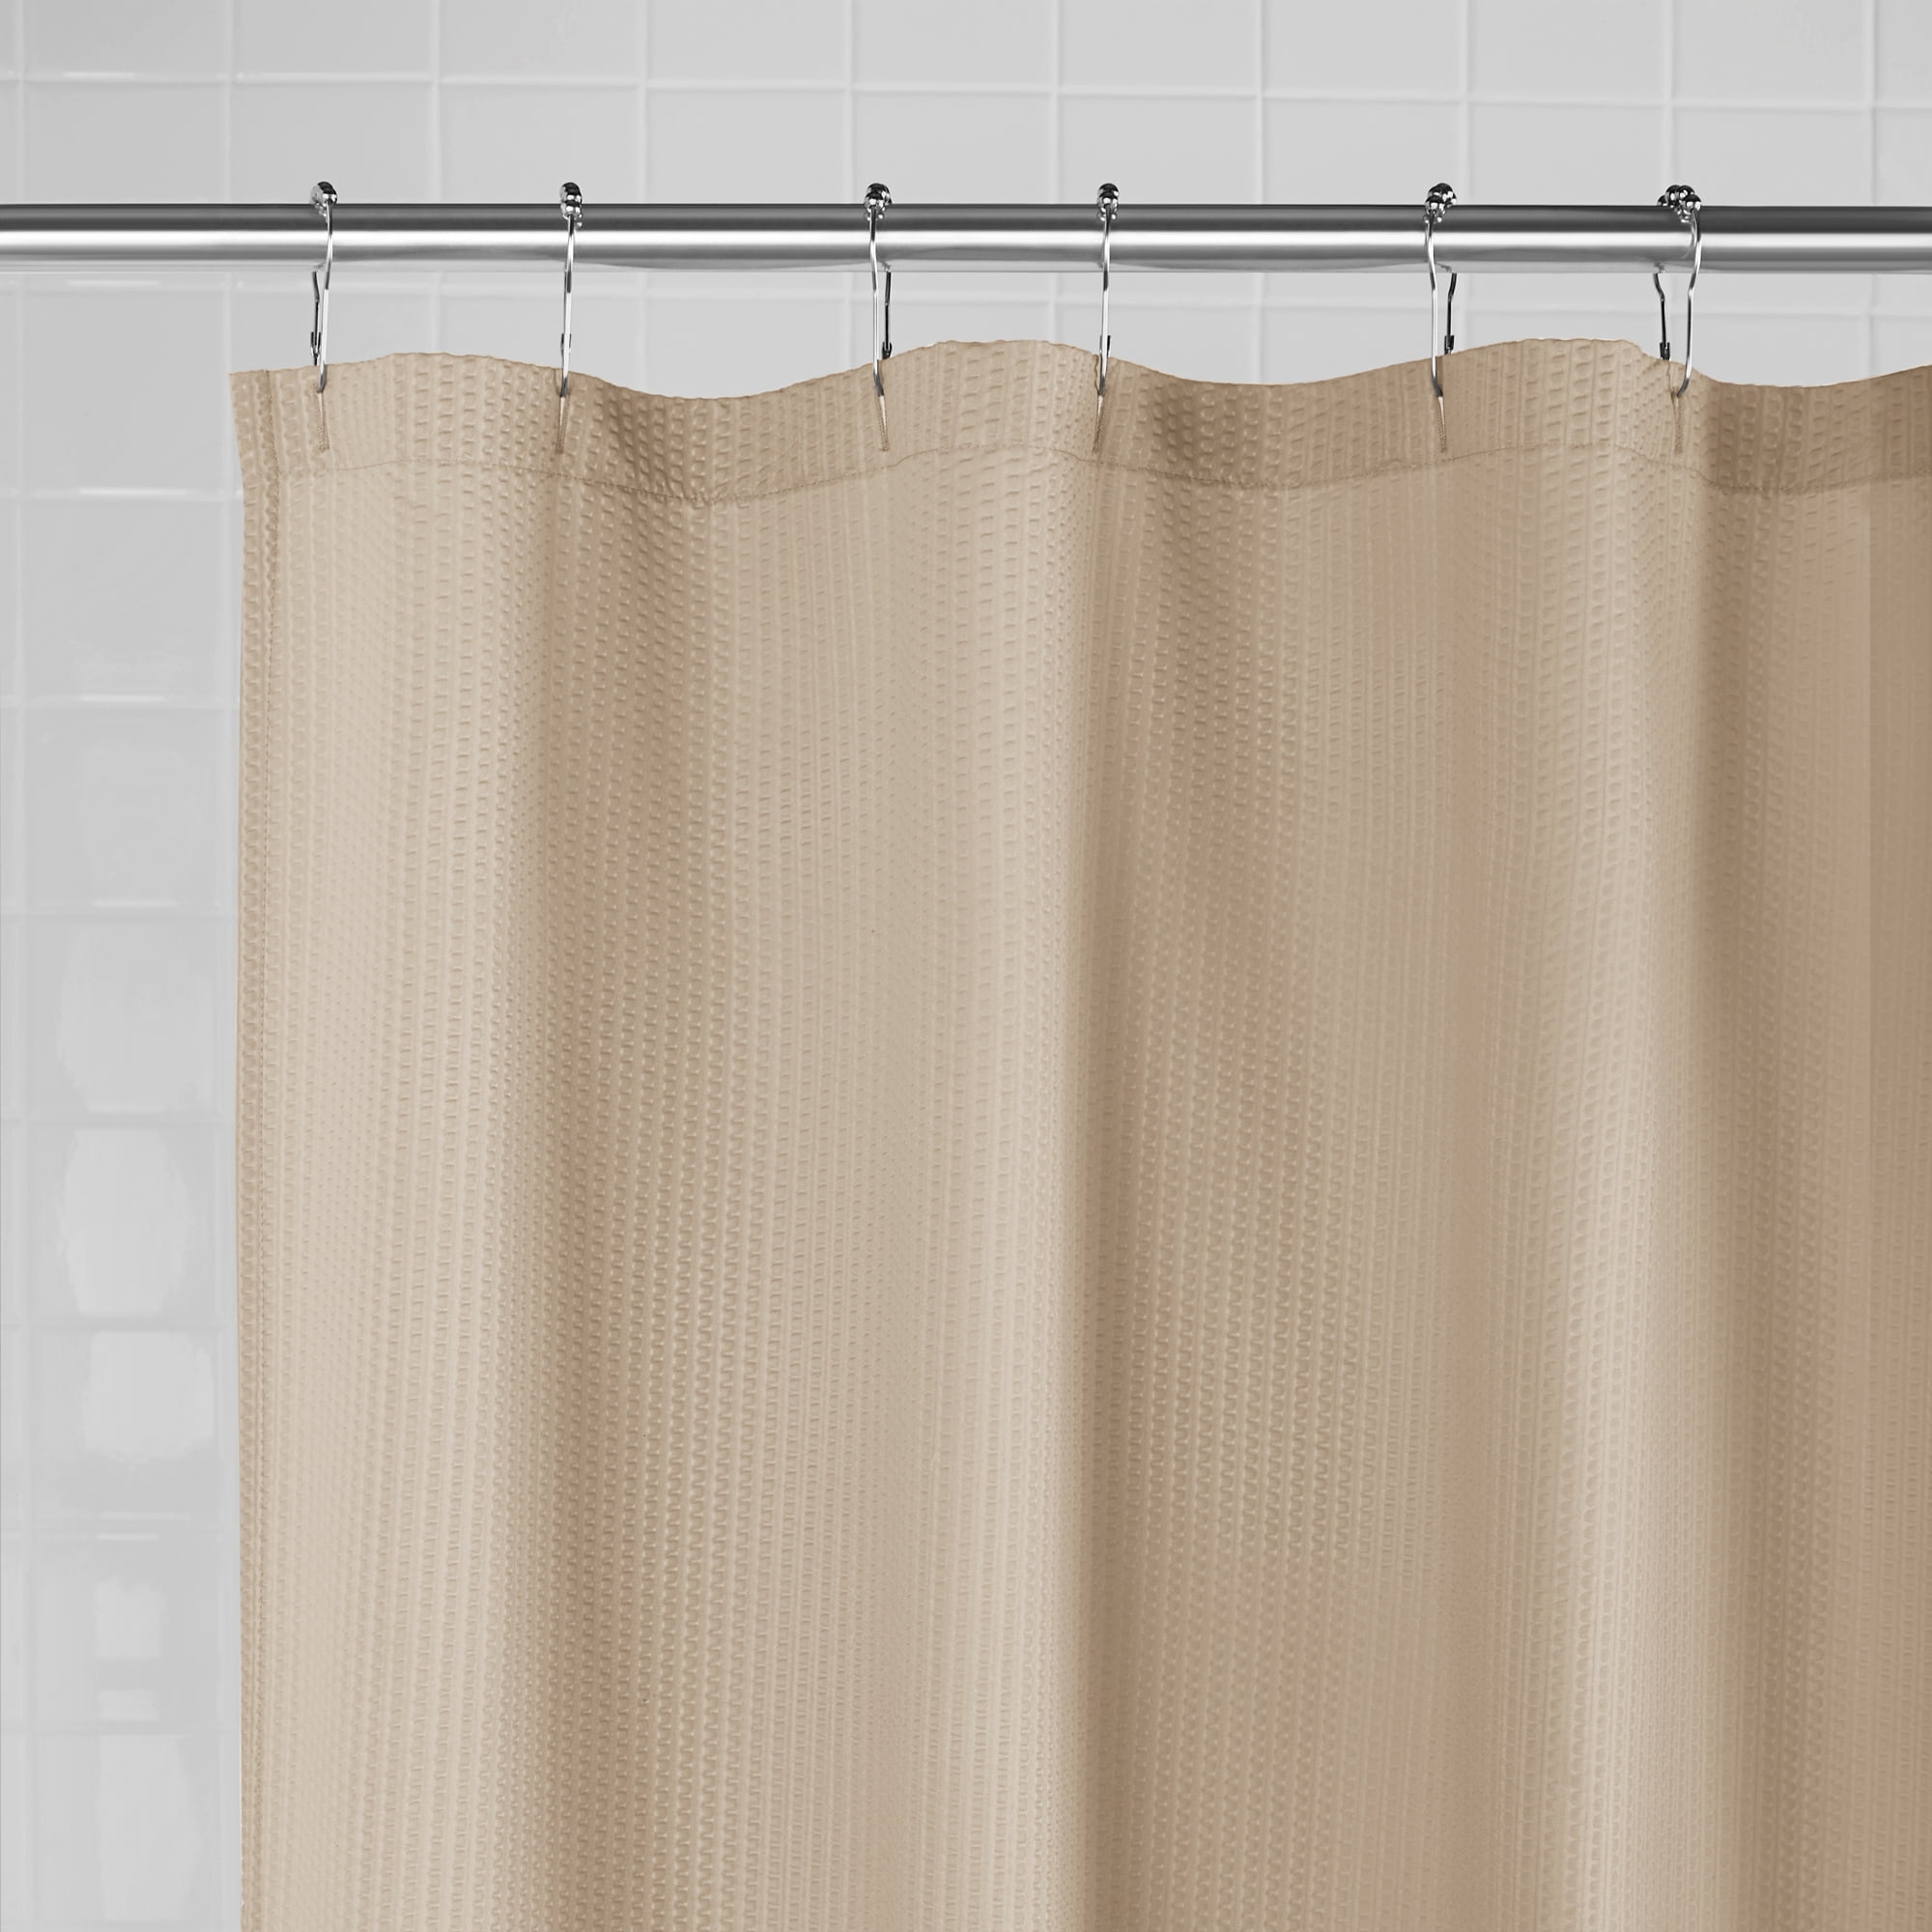 Mainstays Embossed Fabric Shower Liner, Mainstays Water Repellent 70 X 72 Fabric Shower Curtain Or Liner